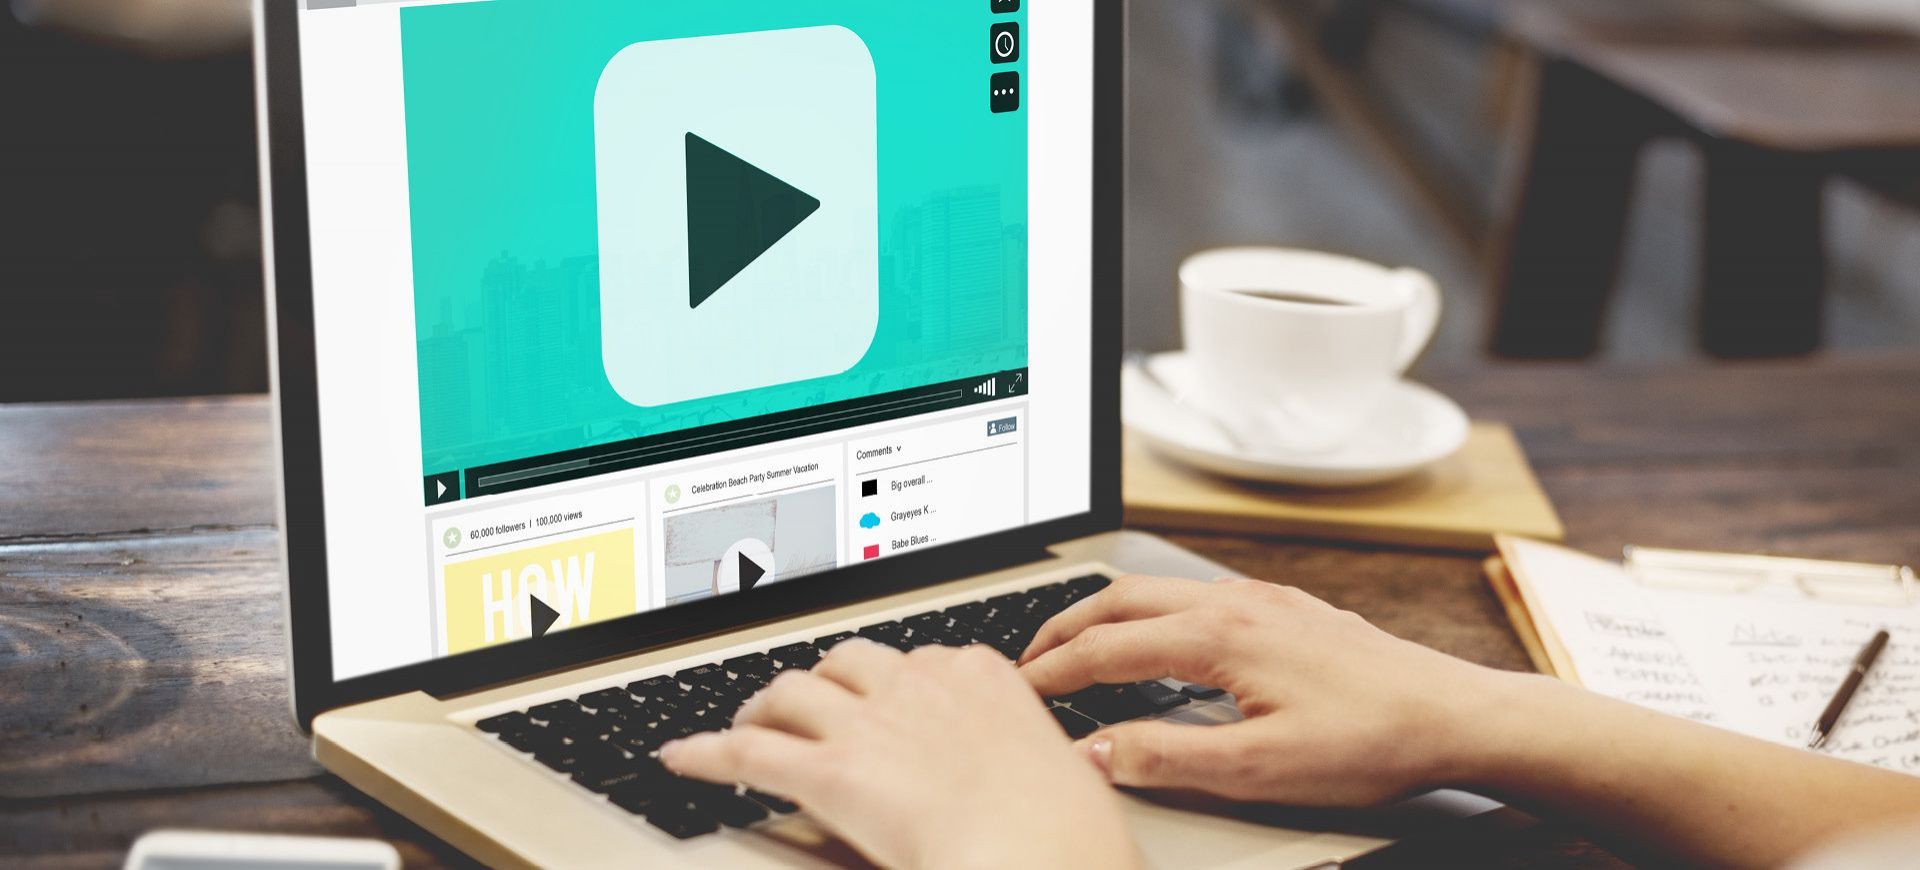 Are Videos Useful In Marketing?